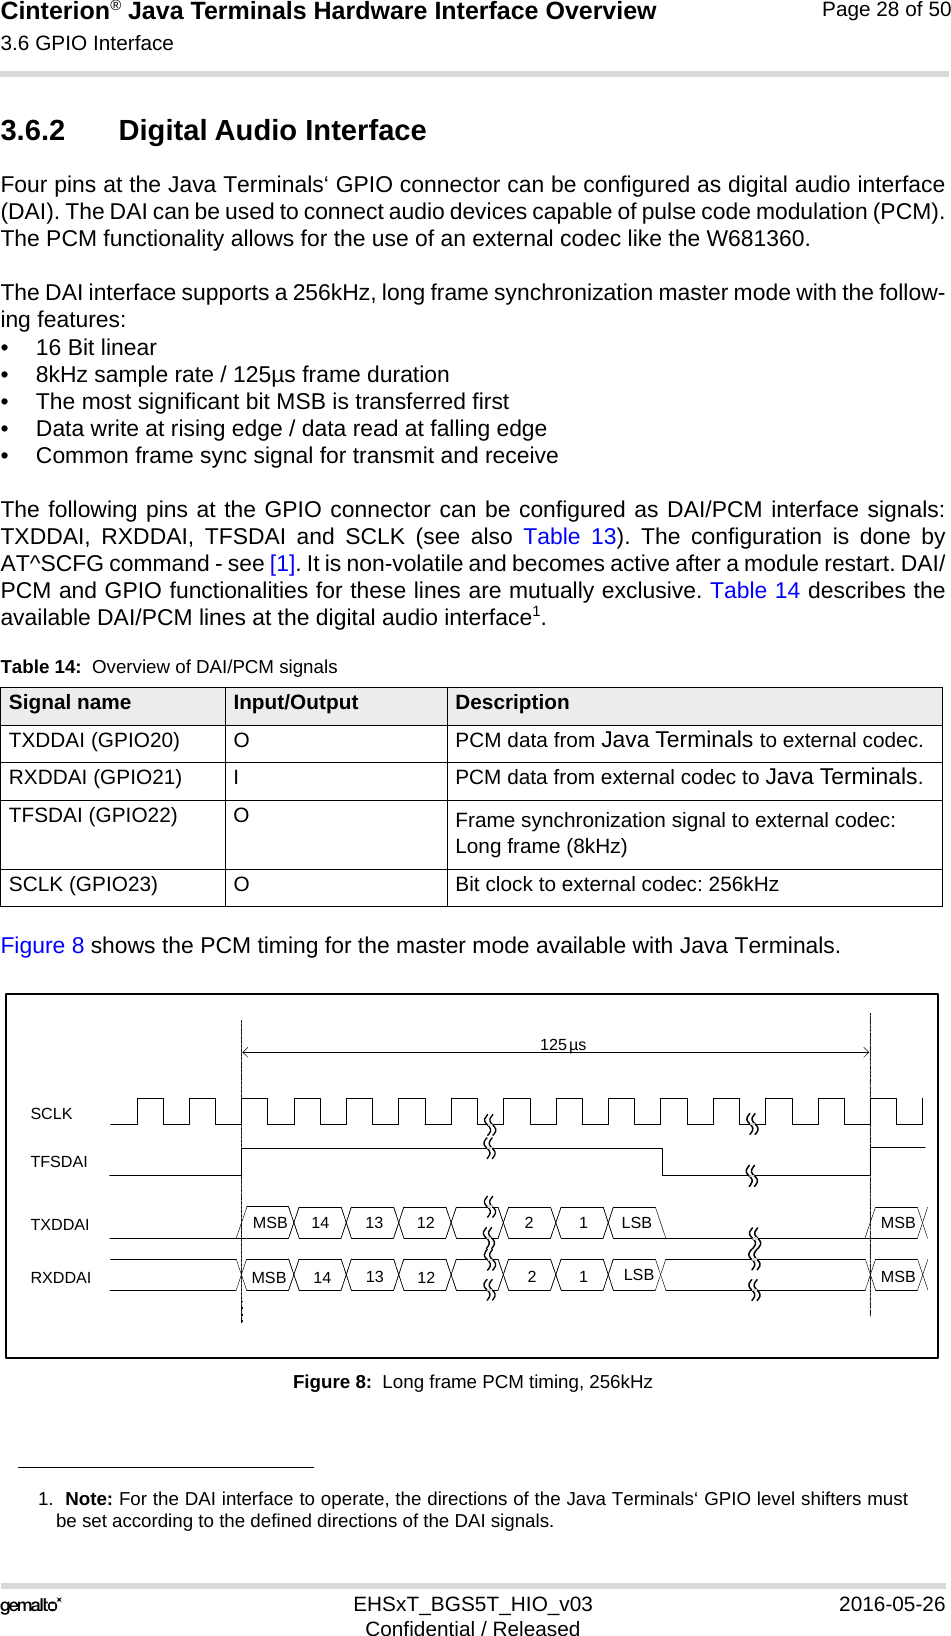 Cinterion® Java Terminals Hardware Interface Overview3.6 GPIO Interface39EHSxT_BGS5T_HIO_v03 2016-05-26Confidential / ReleasedPage 28 of 503.6.2 Digital Audio Interface Four pins at the Java Terminals‘ GPIO connector can be configured as digital audio interface(DAI). The DAI can be used to connect audio devices capable of pulse code modulation (PCM).The PCM functionality allows for the use of an external codec like the W681360. The DAI interface supports a 256kHz, long frame synchronization master mode with the follow-ing features:• 16 Bit linear• 8kHz sample rate / 125µs frame duration• The most significant bit MSB is transferred first• Data write at rising edge / data read at falling edge• Common frame sync signal for transmit and receiveThe following pins at the GPIO connector can be configured as DAI/PCM interface signals:TXDDAI, RXDDAI, TFSDAI and SCLK (see also Table 13). The configuration is done byAT^SCFG command - see [1]. It is non-volatile and becomes active after a module restart. DAI/PCM and GPIO functionalities for these lines are mutually exclusive. Table 14 describes theavailable DAI/PCM lines at the digital audio interface1. Figure 8 shows the PCM timing for the master mode available with Java Terminals.Figure 8:  Long frame PCM timing, 256kHz1.  Note: For the DAI interface to operate, the directions of the Java Terminals‘ GPIO level shifters mustbe set according to the defined directions of the DAI signals. Table 14:  Overview of DAI/PCM signalsSignal name Input/Output DescriptionTXDDAI (GPIO20) O PCM data from Java Terminals to external codec.RXDDAI (GPIO21) I PCM data from external codec to Java Terminals.TFSDAI (GPIO22) O Frame synchronization signal to external codec:Long frame (8kHz)SCLK (GPIO23) O Bit clock to external codec: 256kHz SCLK  TXDDAI  RXDDAI  TFSDAI  MSB  MSB  LSB  LSB  14  13  14  13  1 1 12  12  2 2 MSB  MSB  125   µs  